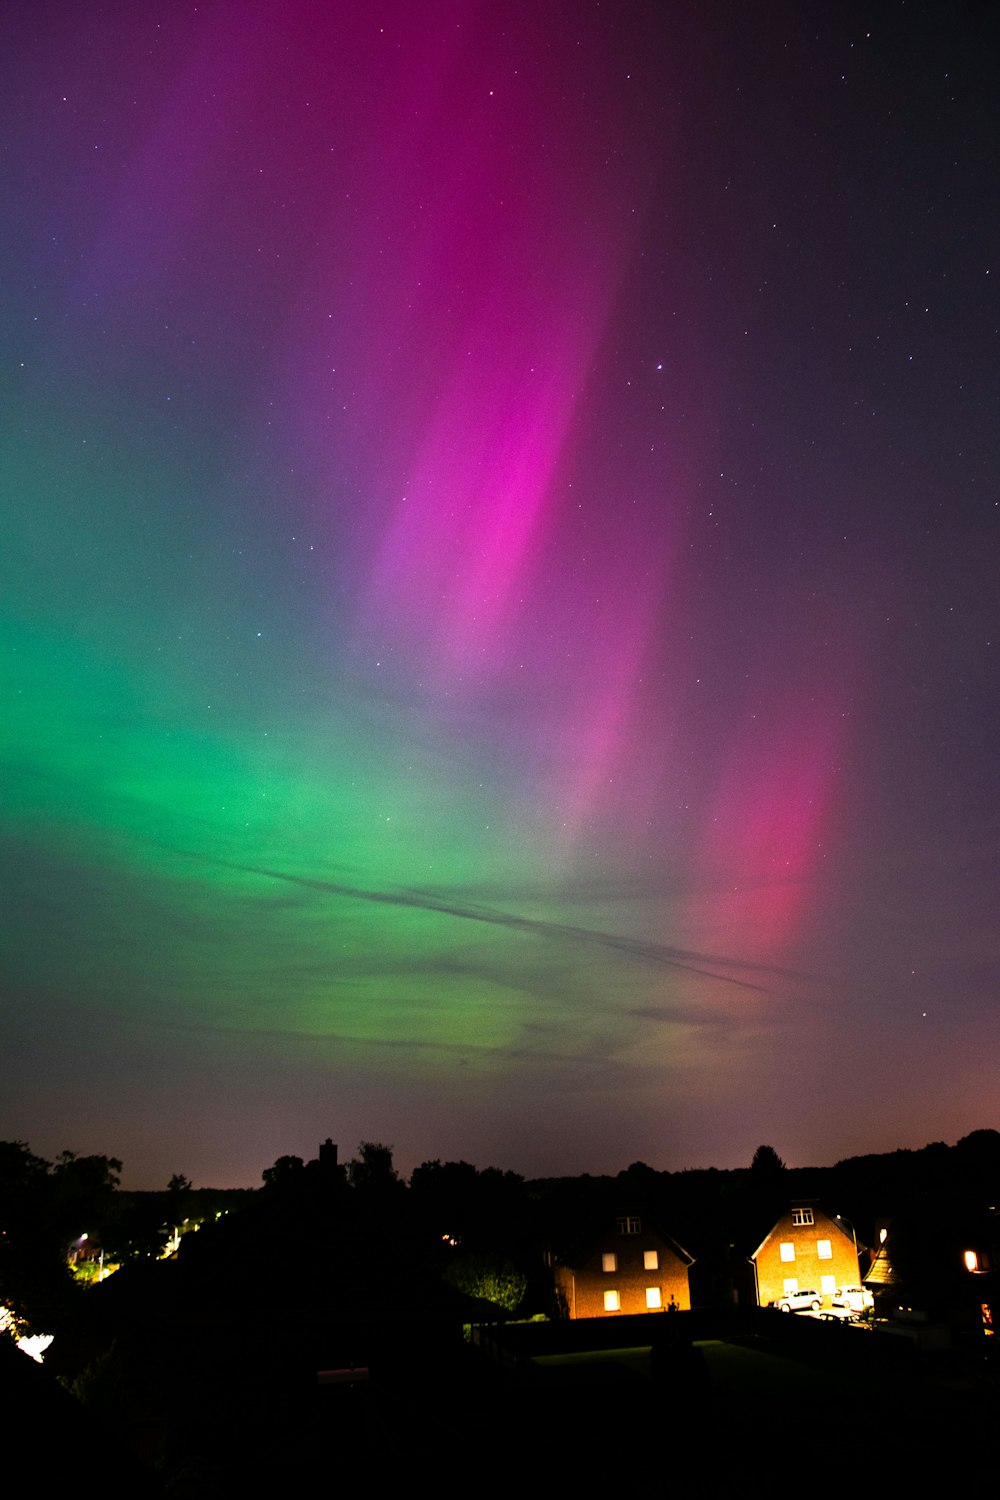 the aurora bore in the night sky over houses